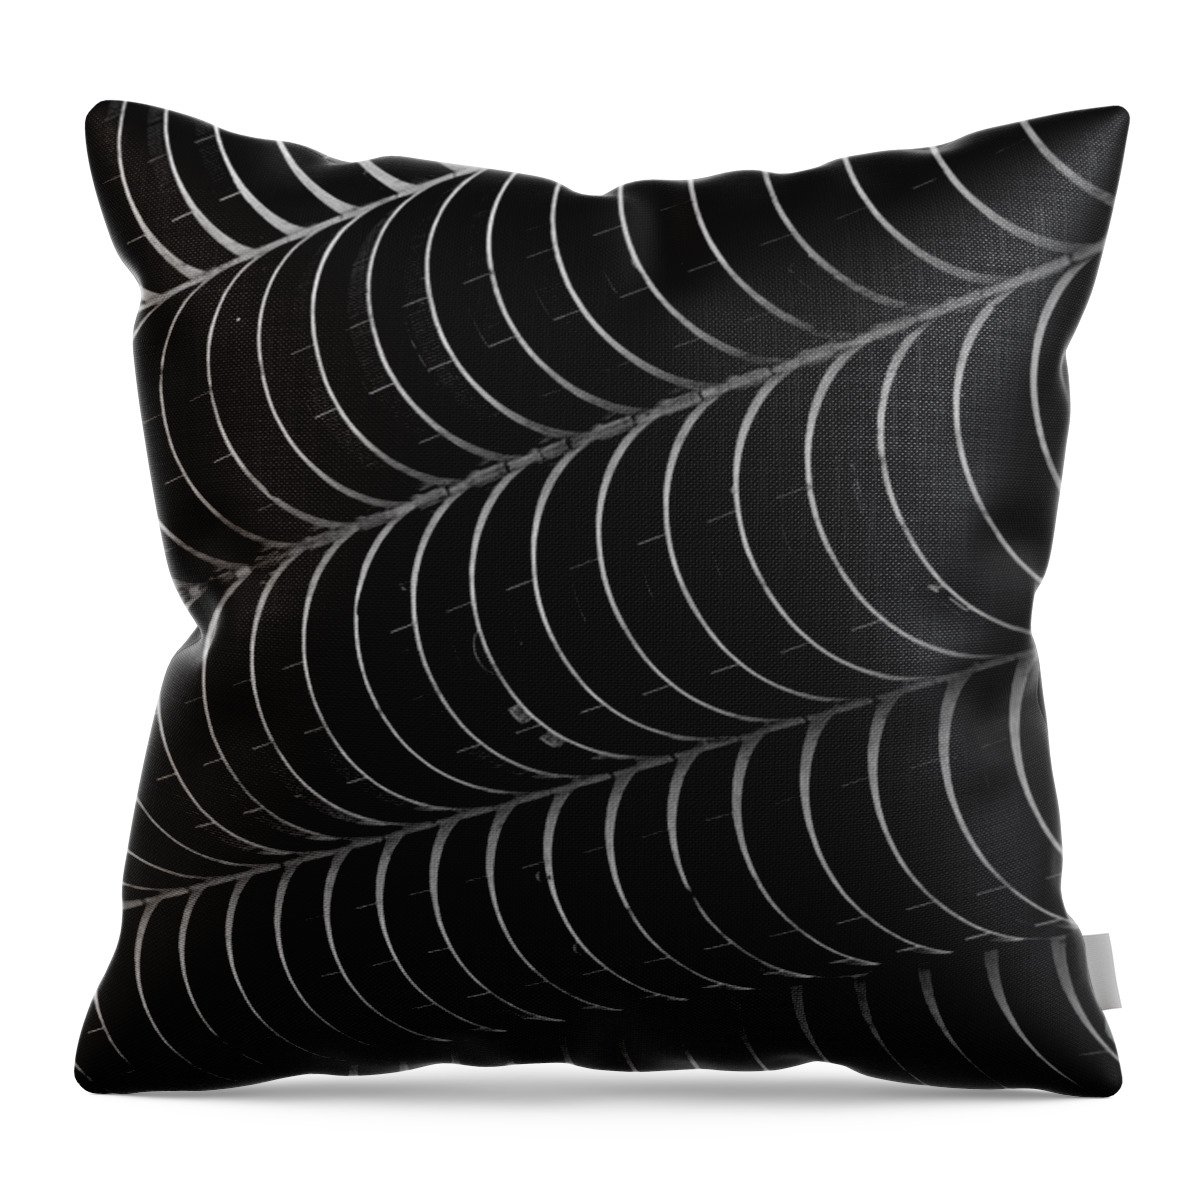 Chicago Throw Pillow featuring the photograph Corn Cob Chicago Abstract by Debra Banks